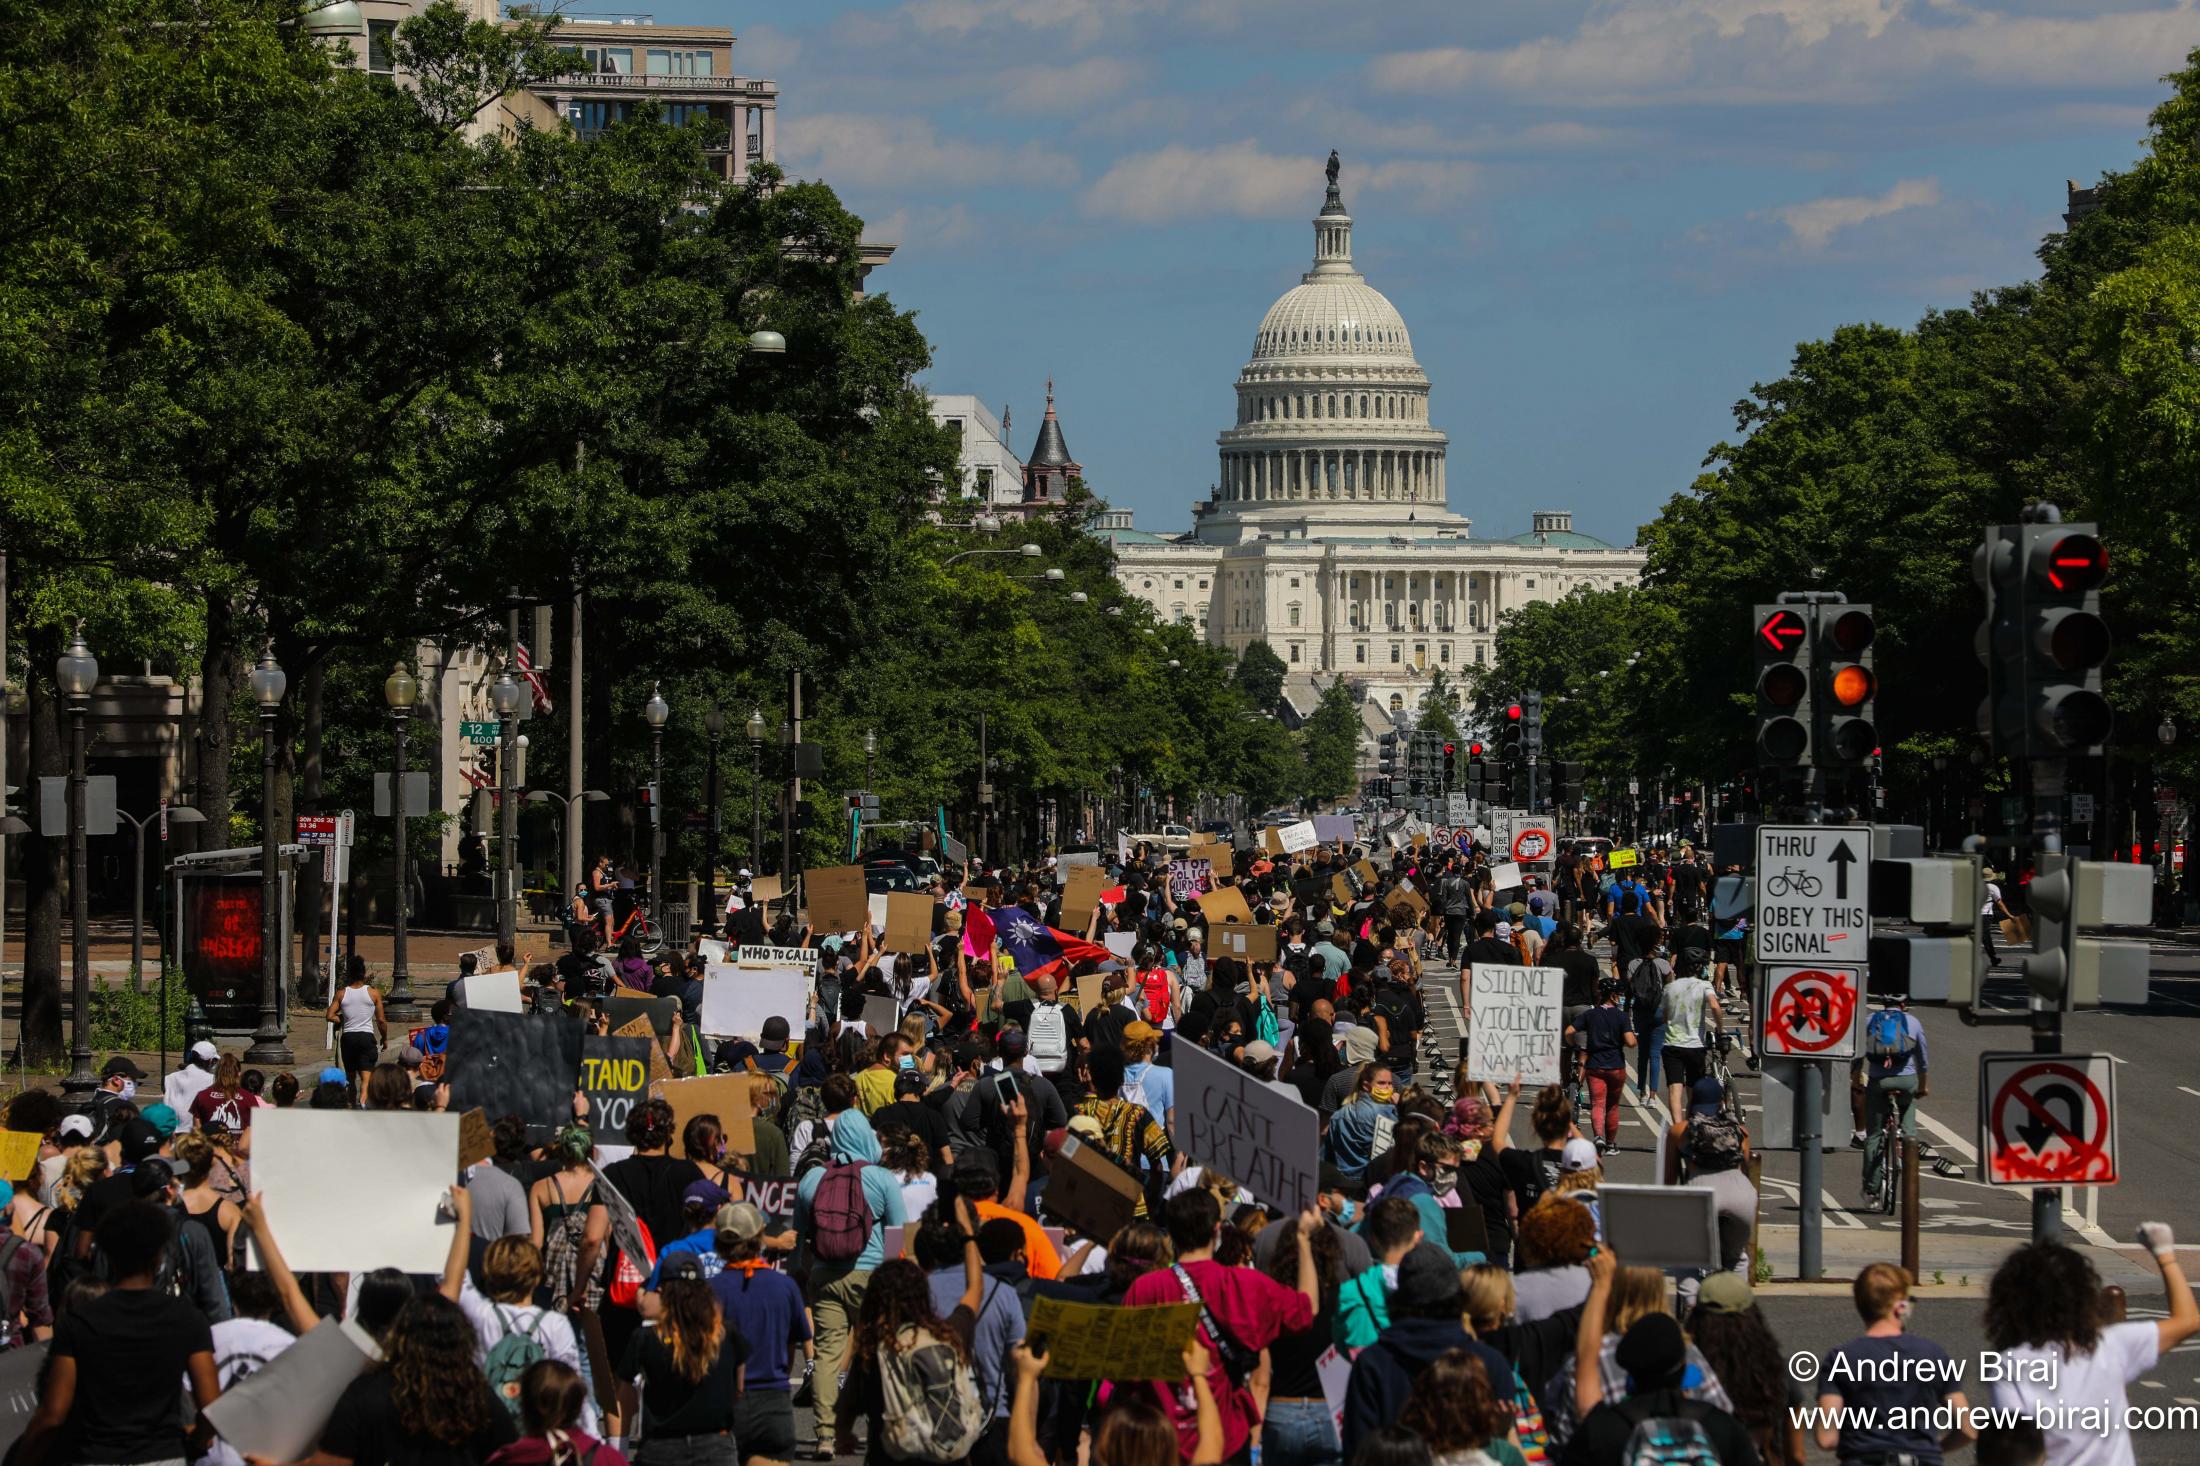 Demonstrators protest peacefully as they merge to the U.S Capitol in Washington, D.C., U.S.A. Thousands of people protest against the death in Minneapolis custody of George Floyd, in Washington on June 1, 2020.